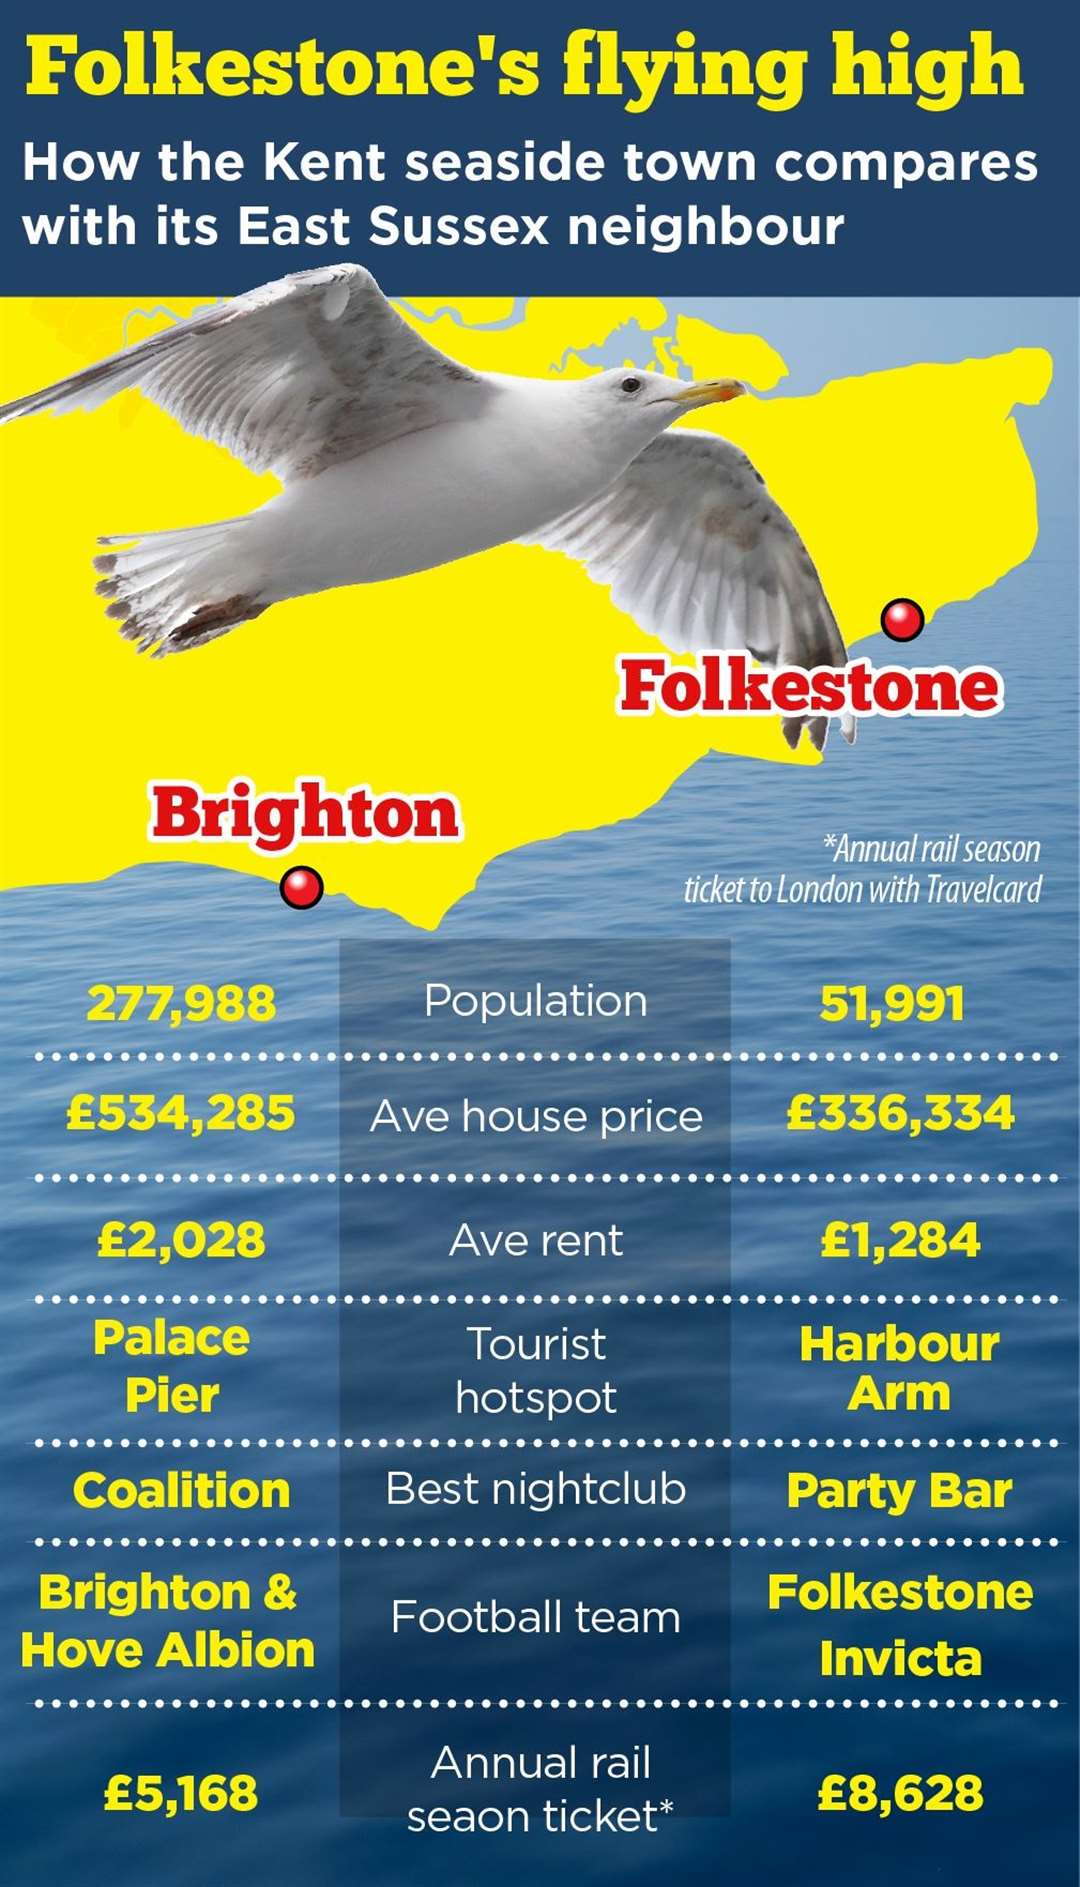 Folkestone or Brighton... where would you rather live?